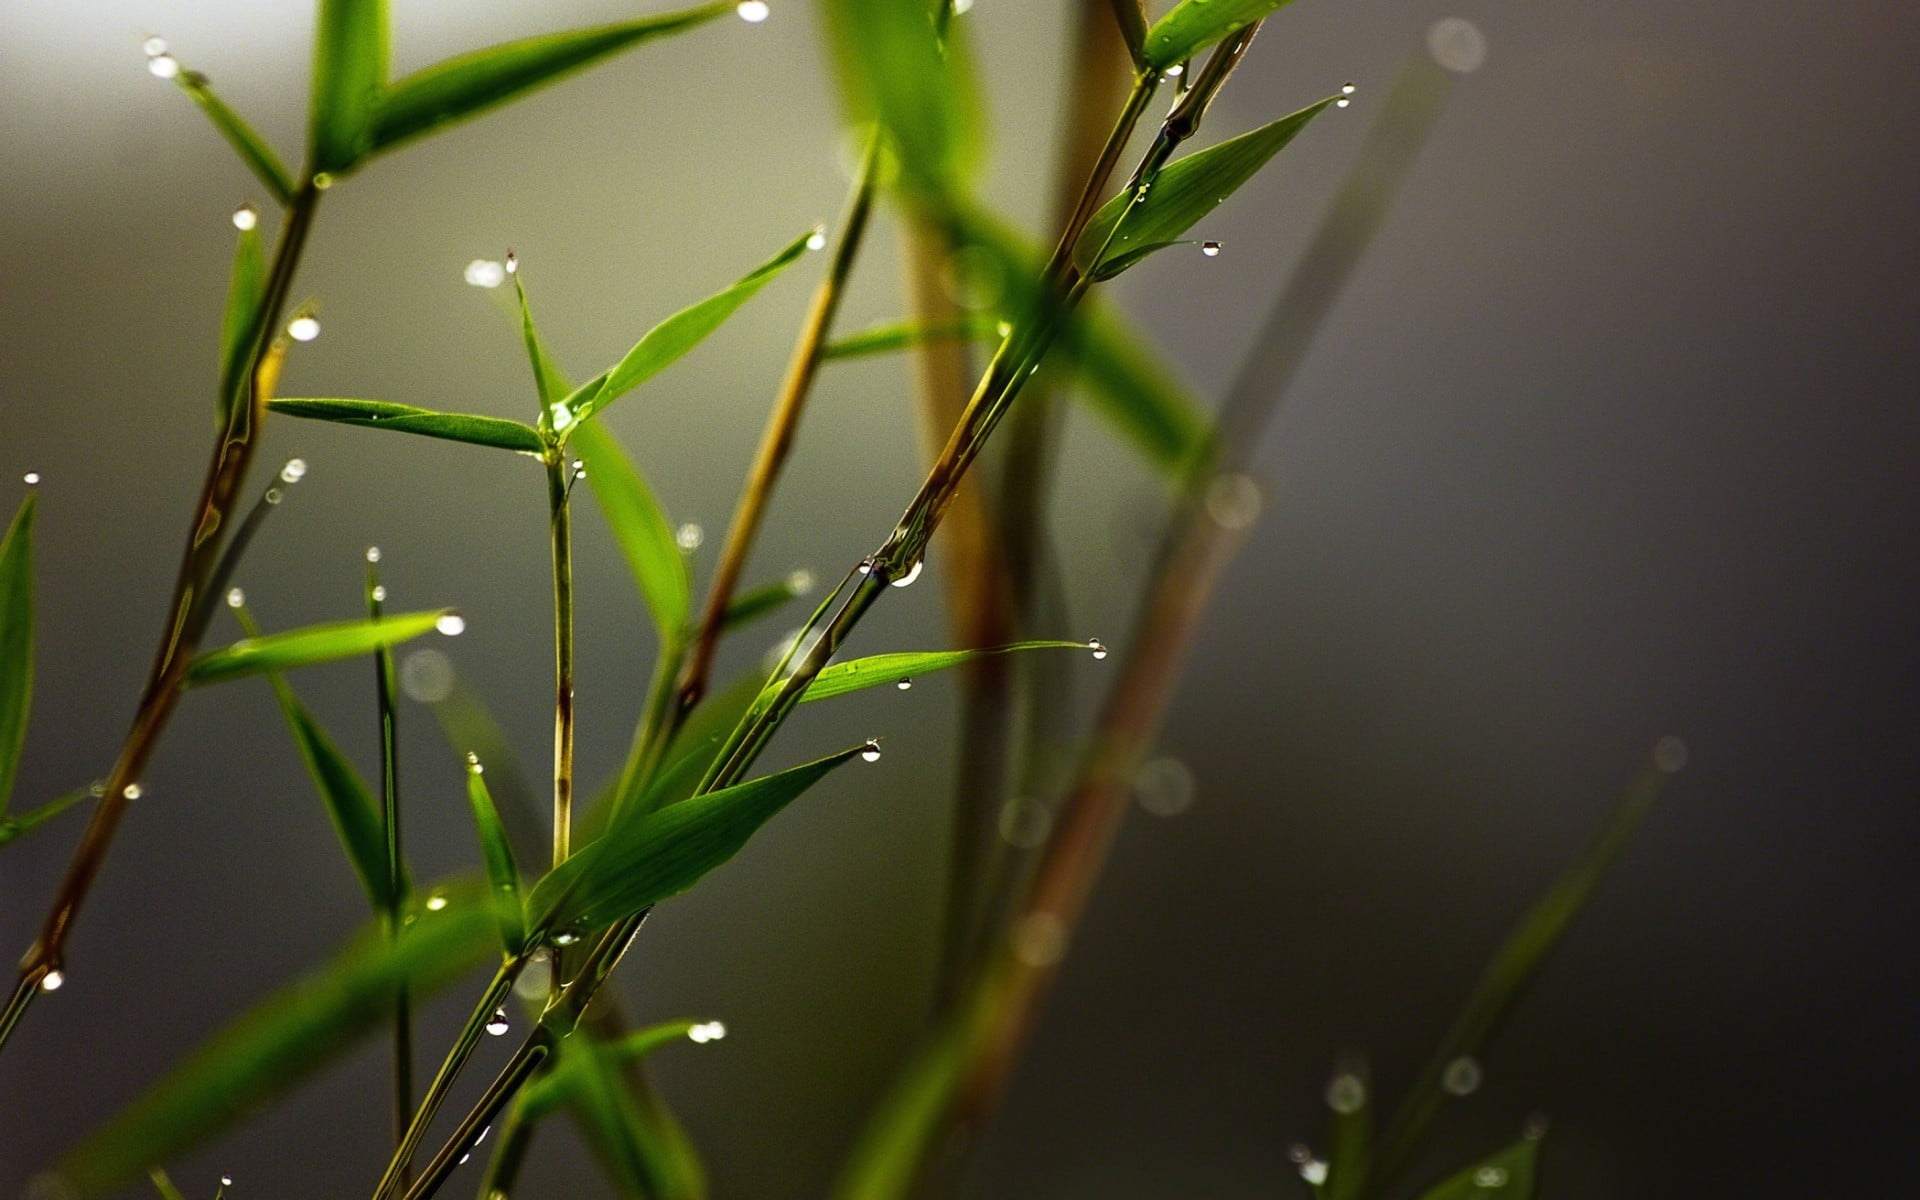 Wallpaper microphotography of green grass and water dew, green leafed plant